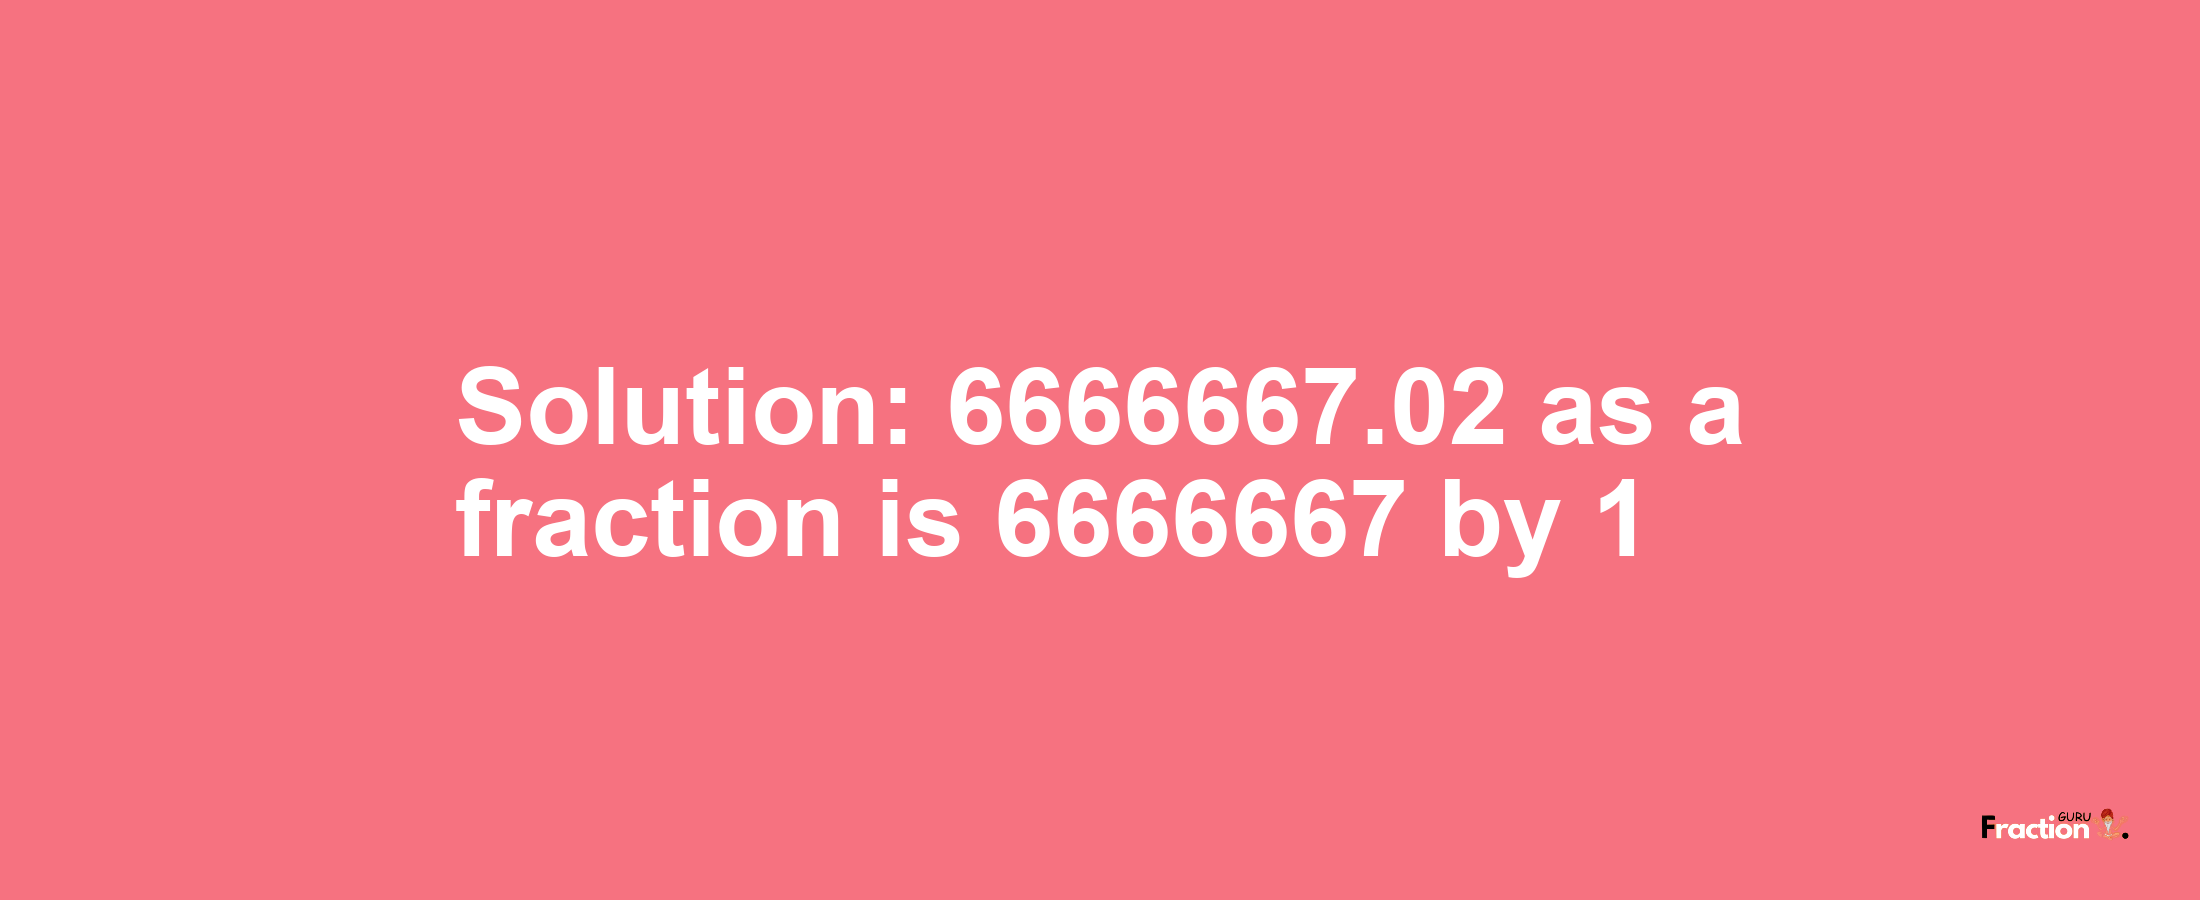 Solution:6666667.02 as a fraction is 6666667/1